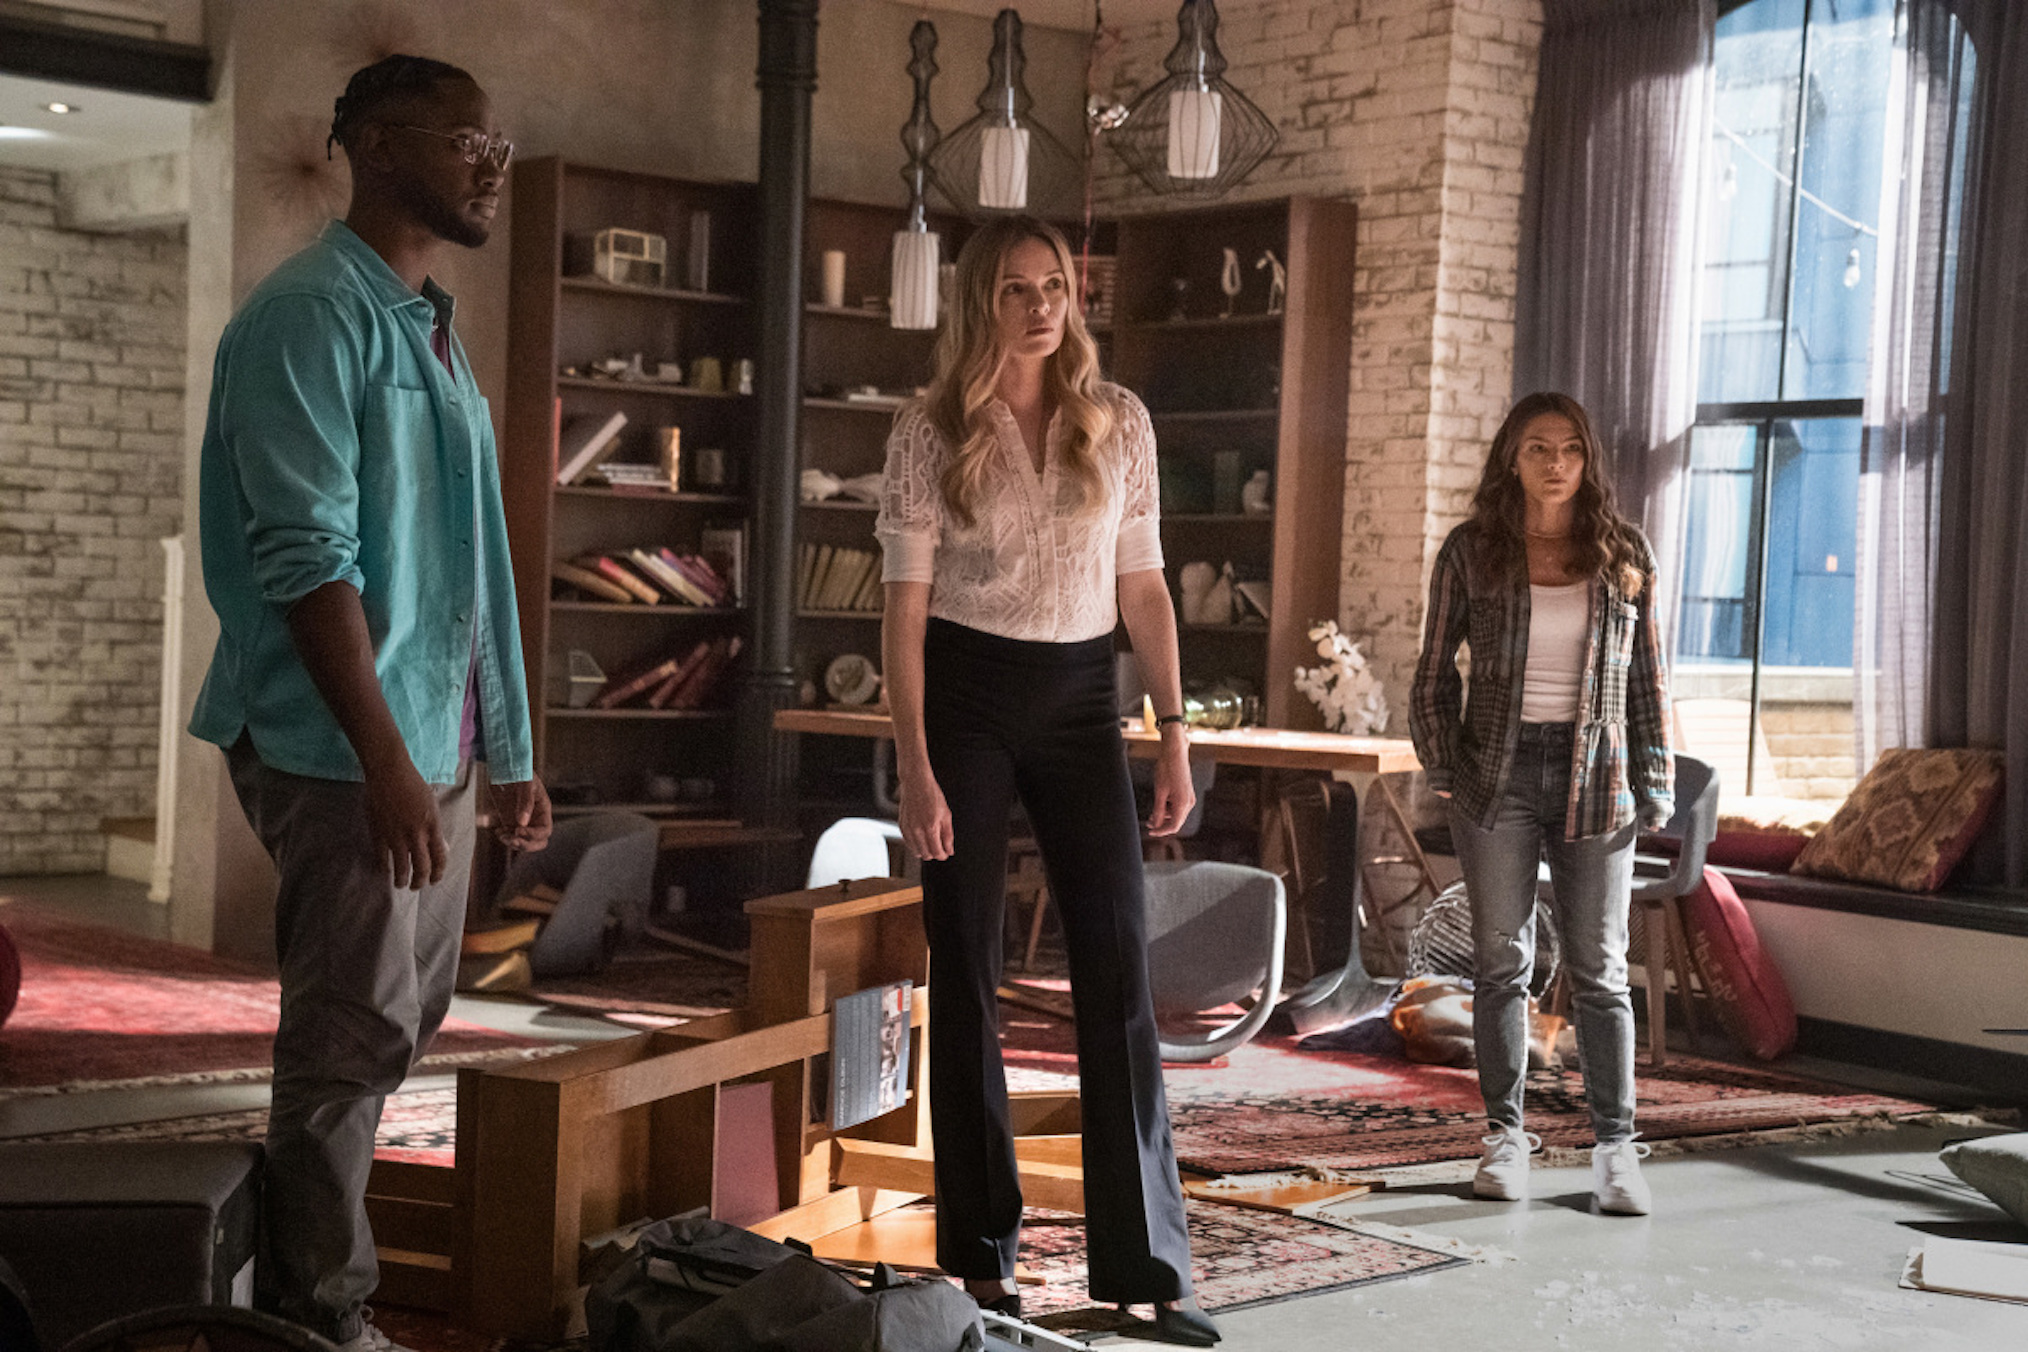 Brandon McKnight as Chester, Danielle Panabaker as Caitlin, Kayla Compton as Allegra in The Flash